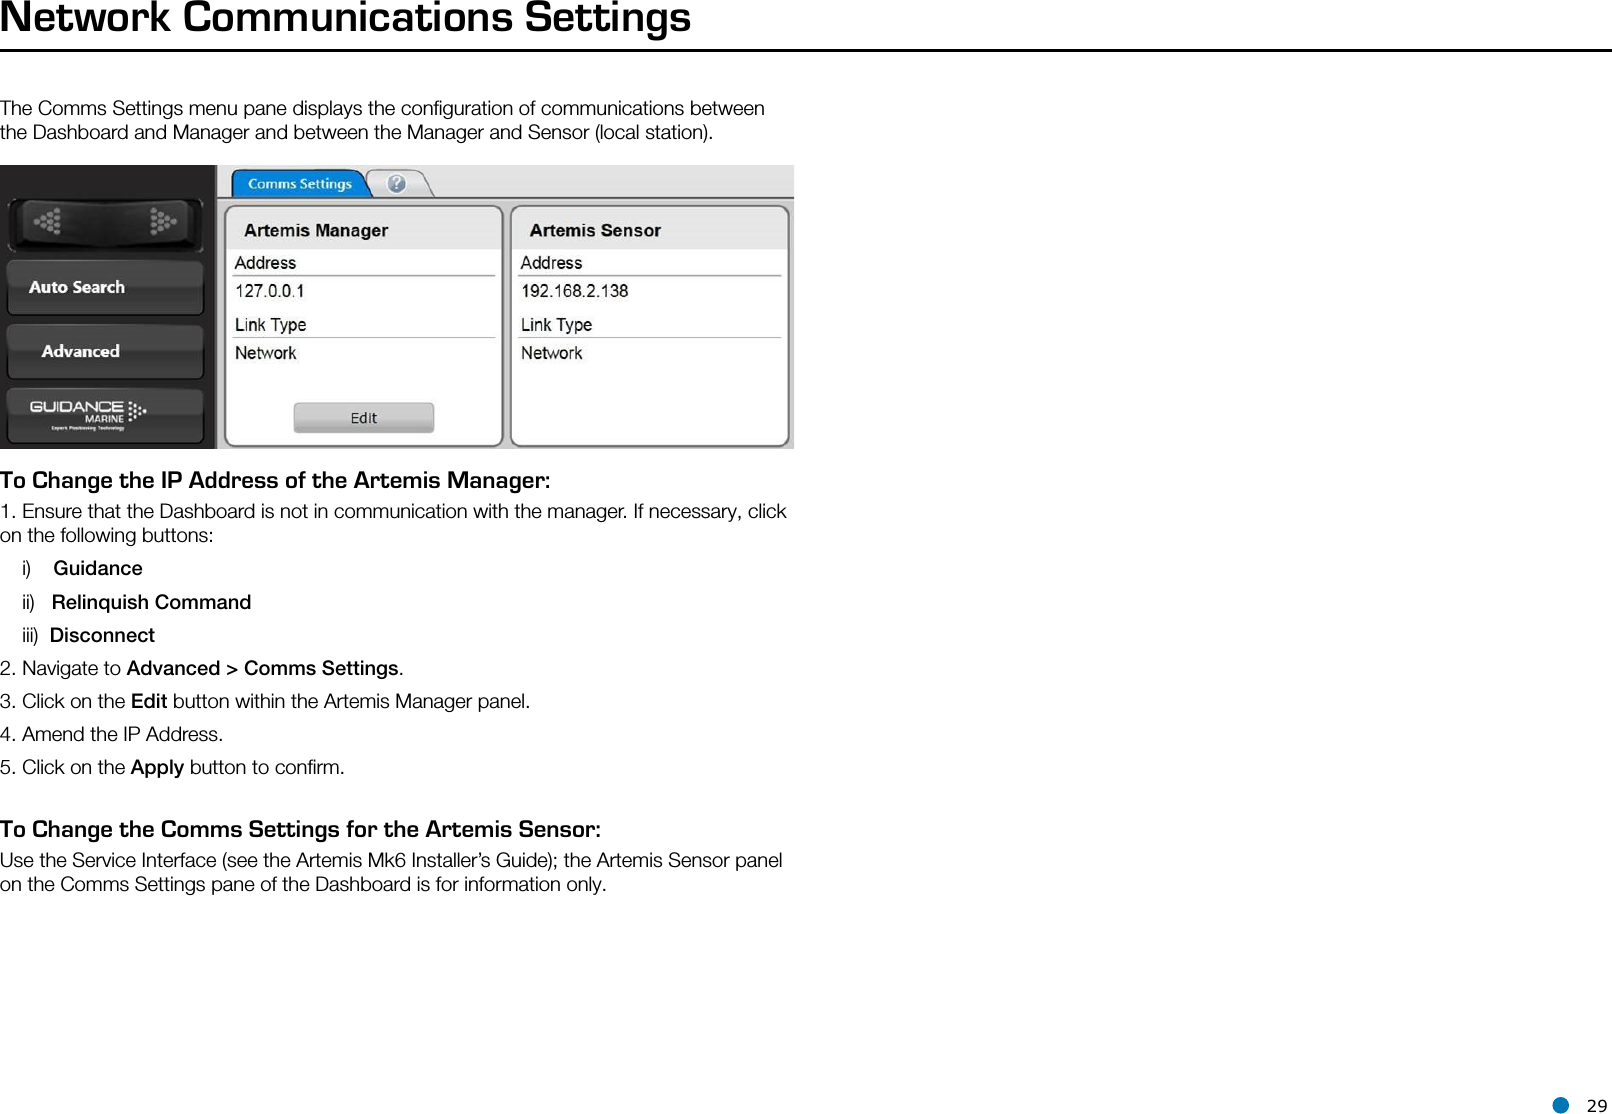 l 29The Comms Settings menu pane displays the conﬁguration of communications between the Dashboard and Manager and between the Manager and Sensor (local station).Network Communications SettingsTo Change the IP Address of the Artemis Manager:1. Ensure that the Dashboard is not in communication with the manager. If necessary, click on the following buttons:    i)    Guidance    ii)   Relinquish Command    iii)  Disconnect2. Navigate to Advanced &gt; Comms Settings.3. Click on the Edit button within the Artemis Manager panel.4. Amend the IP Address.5. Click on the Apply button to conﬁrm.To Change the Comms Settings for the Artemis Sensor:Use the Service Interface (see the Artemis Mk6 Installer’s Guide); the Artemis Sensor panel on the Comms Settings pane of the Dashboard is for information only.